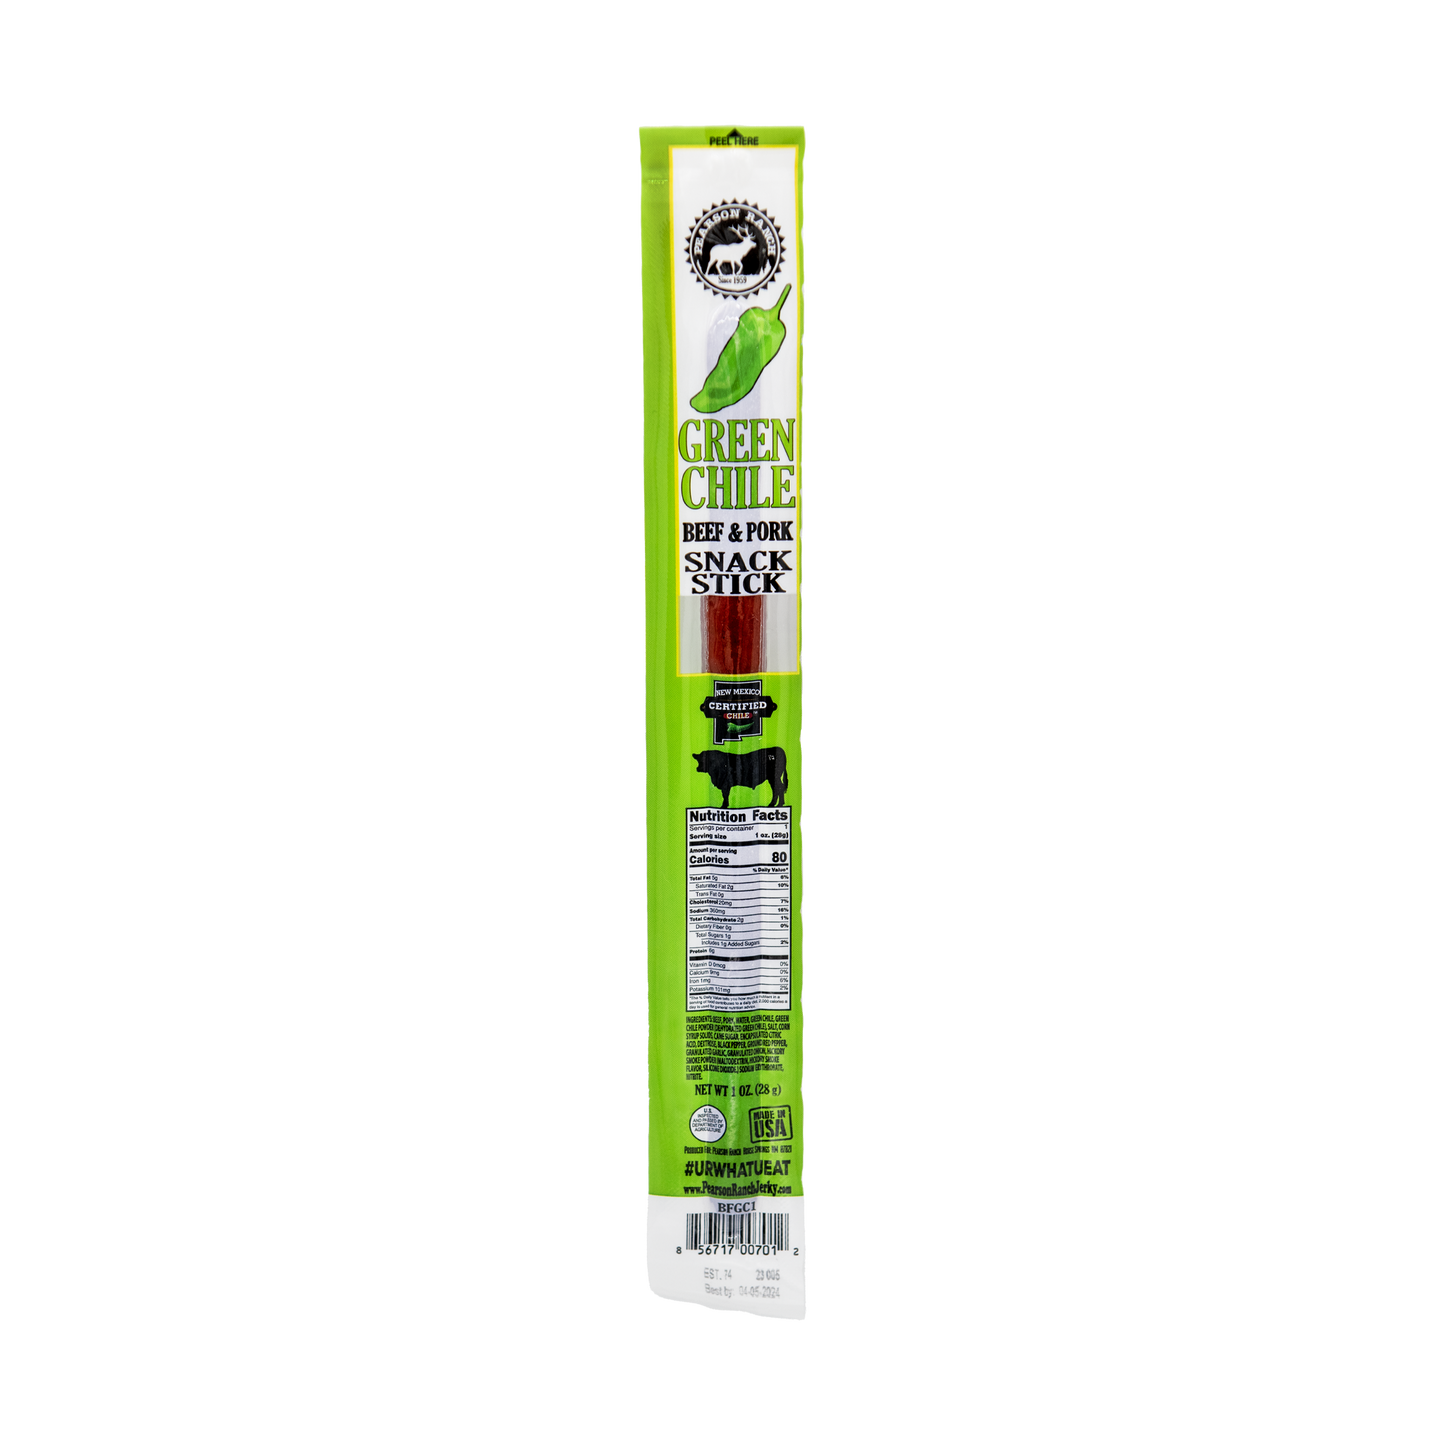 Wholesale Green Chile Beef & Pork Snack Stick - 24 count caddy - Pearson Ranch Jerky